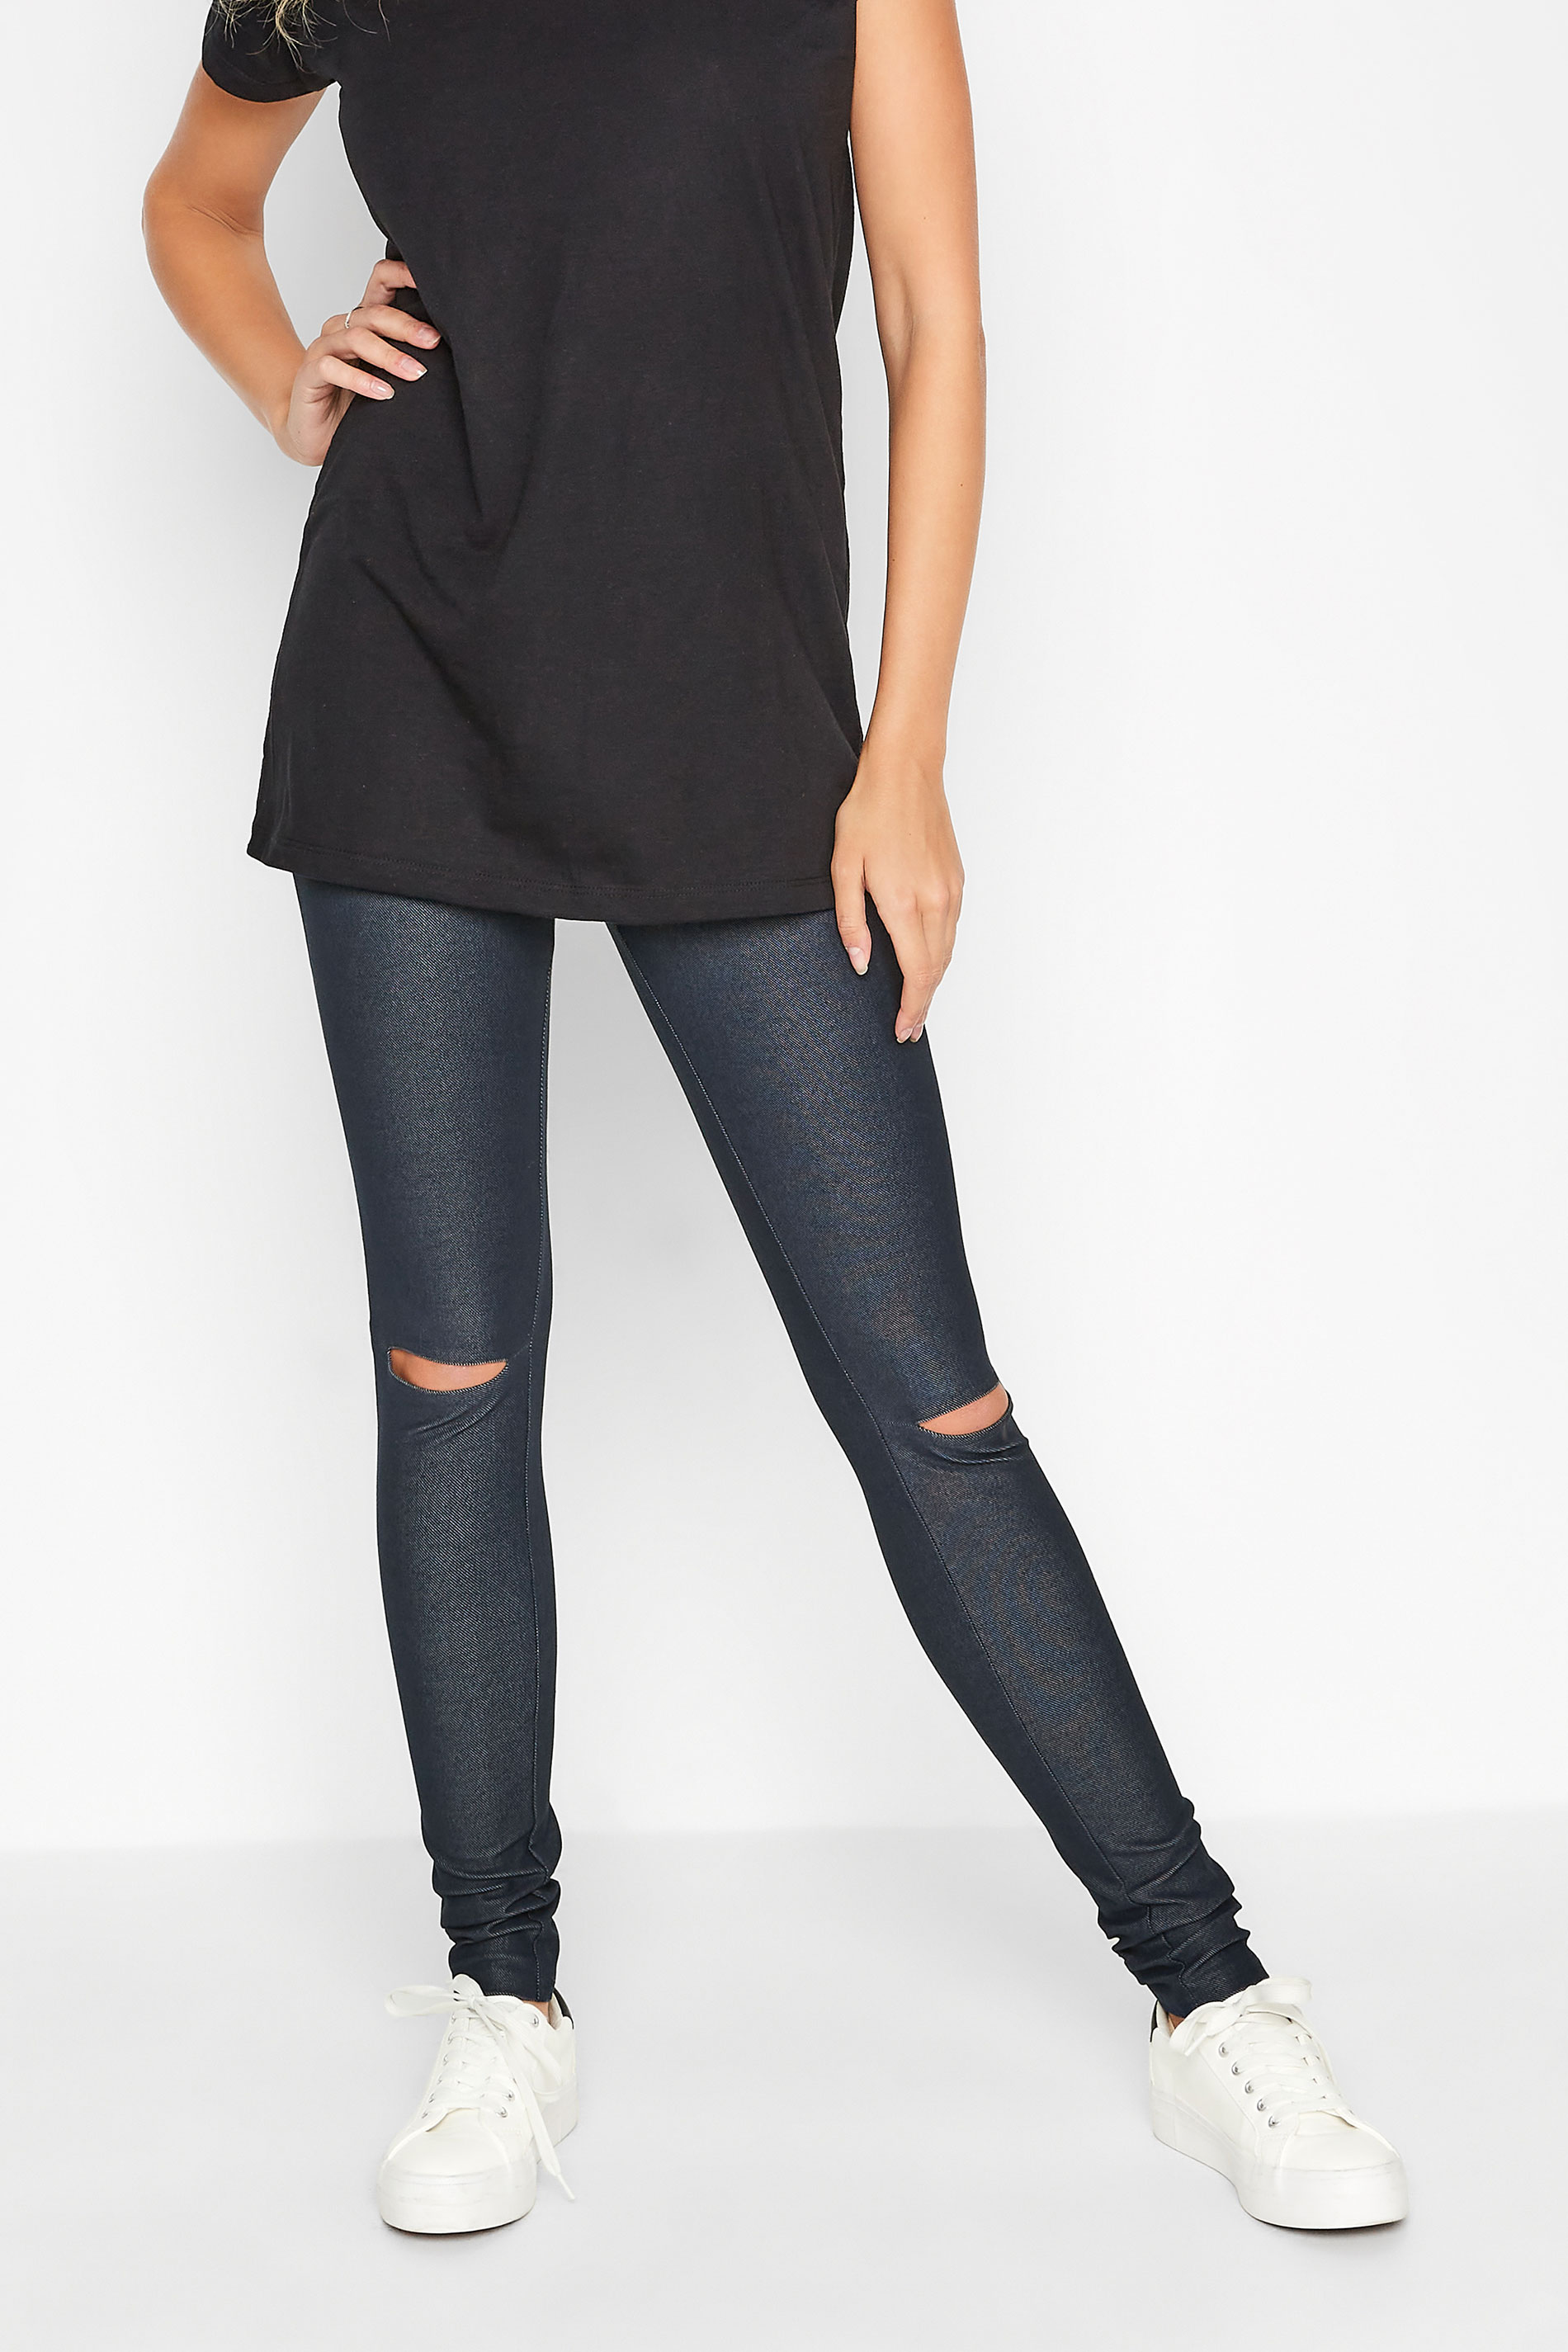 LTS Navy Blue Ripped Knee Jersey Jeggings | Long Tall Sally 1